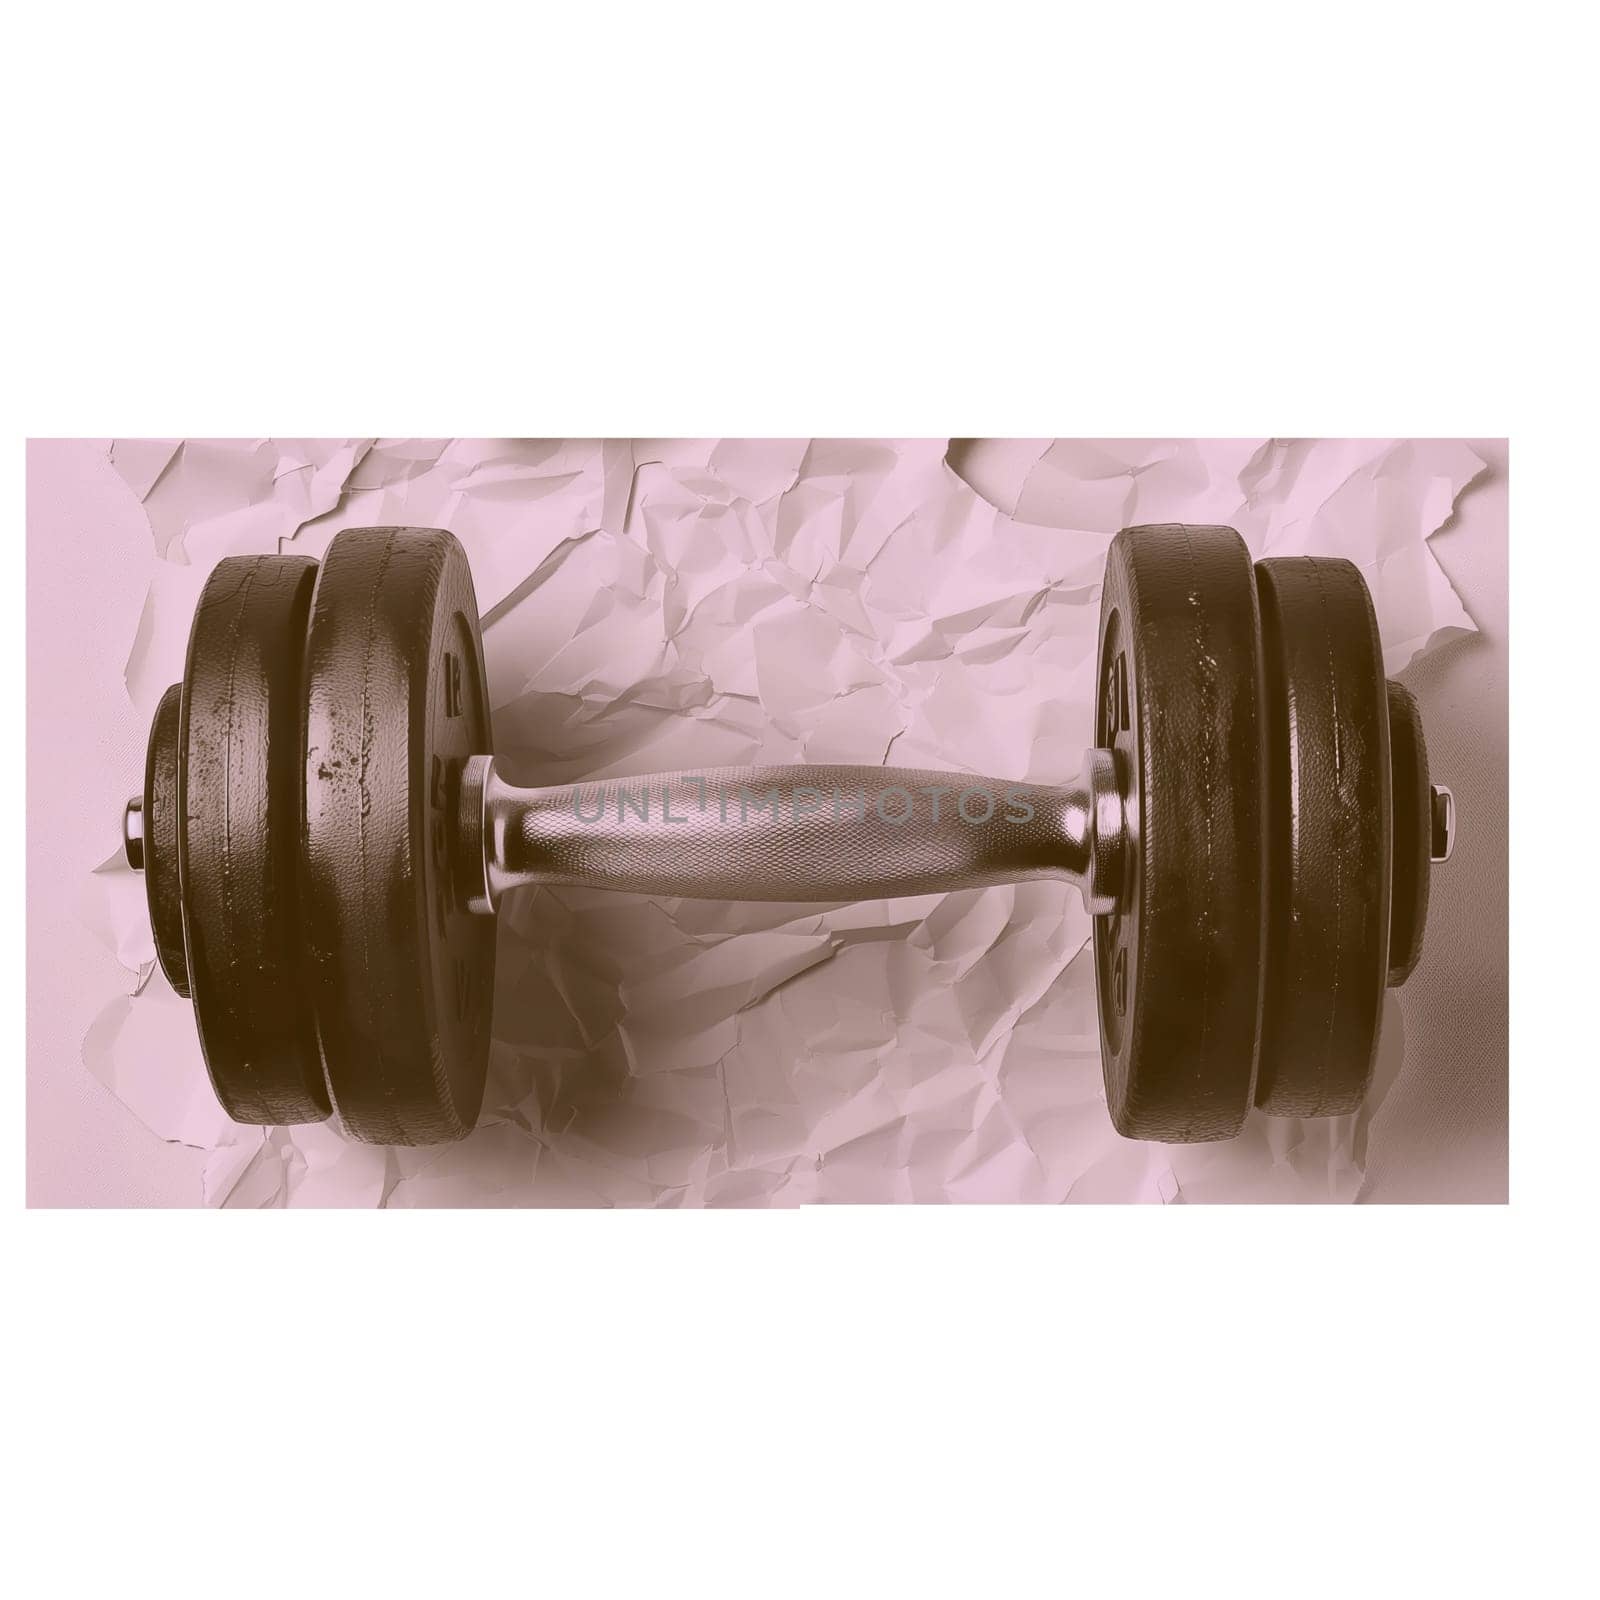 Gym dumbbell cut out image by Dustick